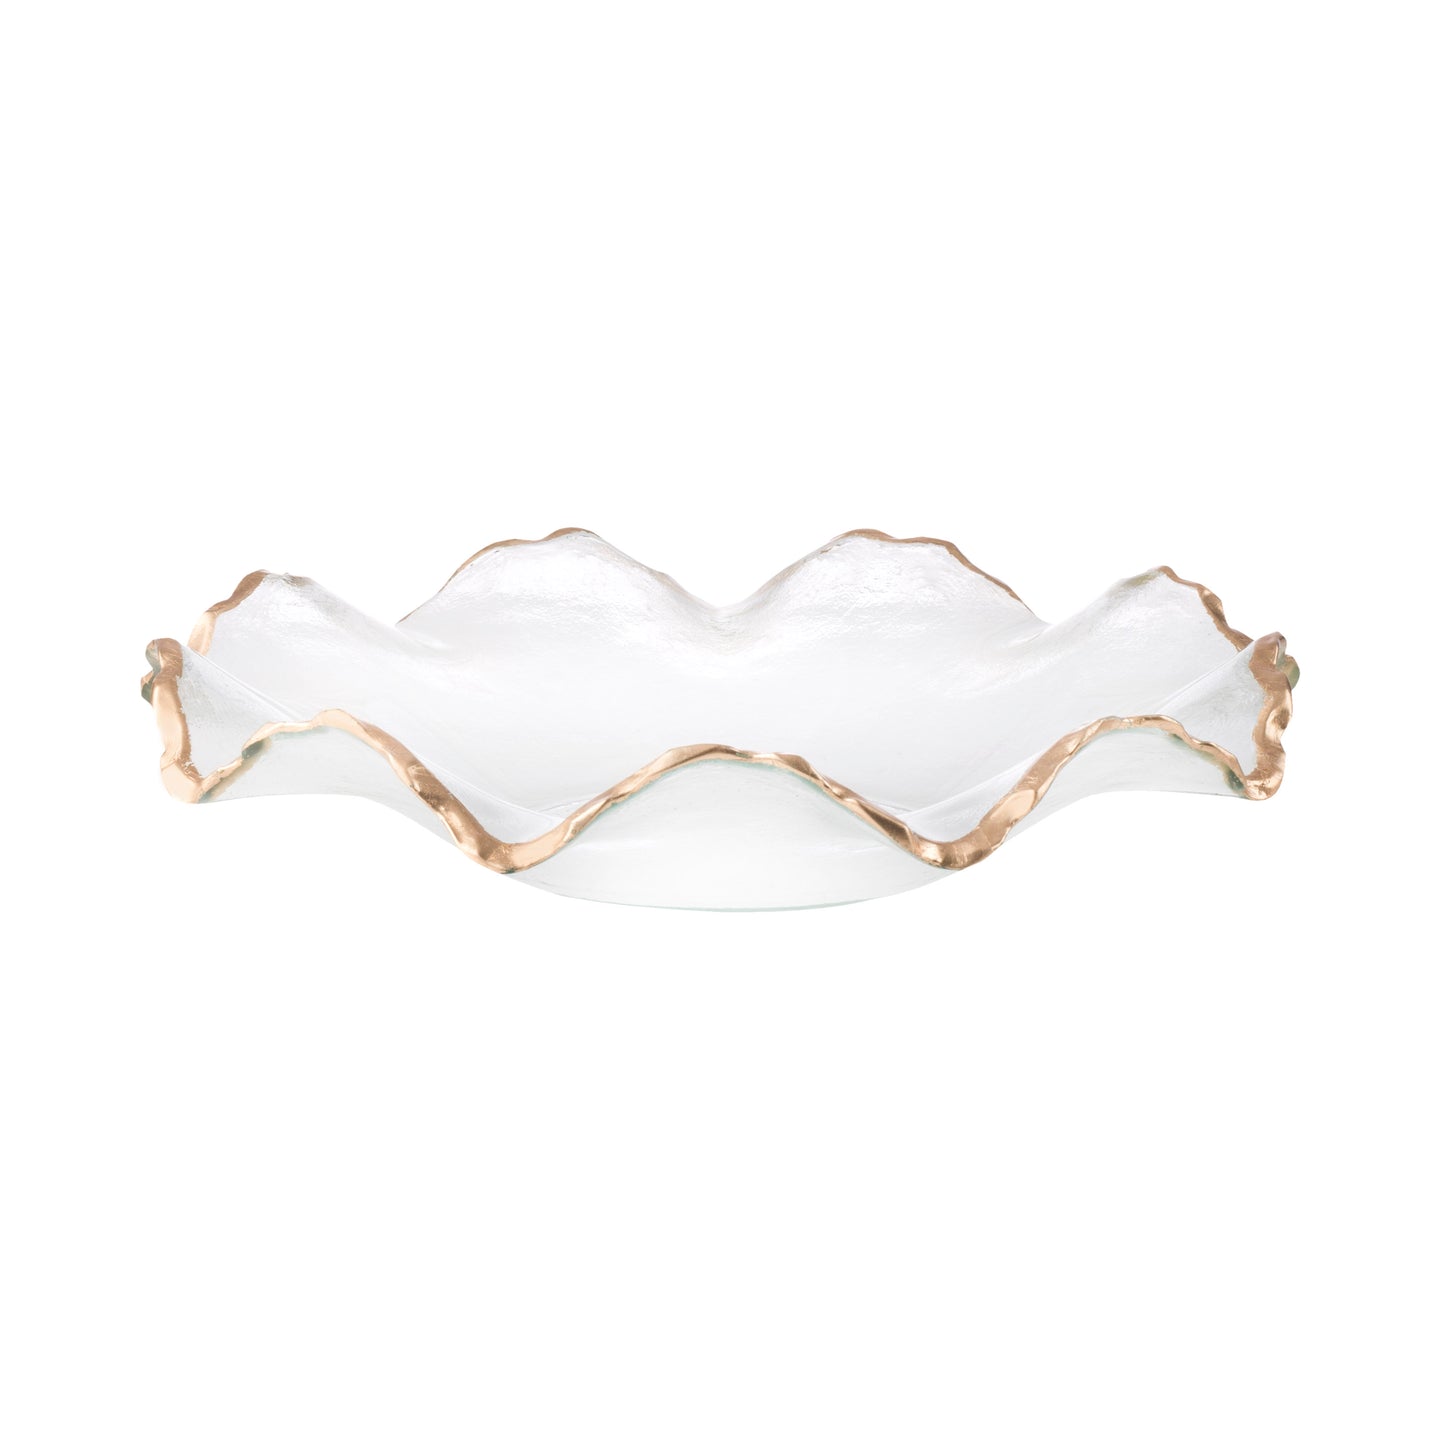 Glass Ruffle Bowl with Gold Edge 12